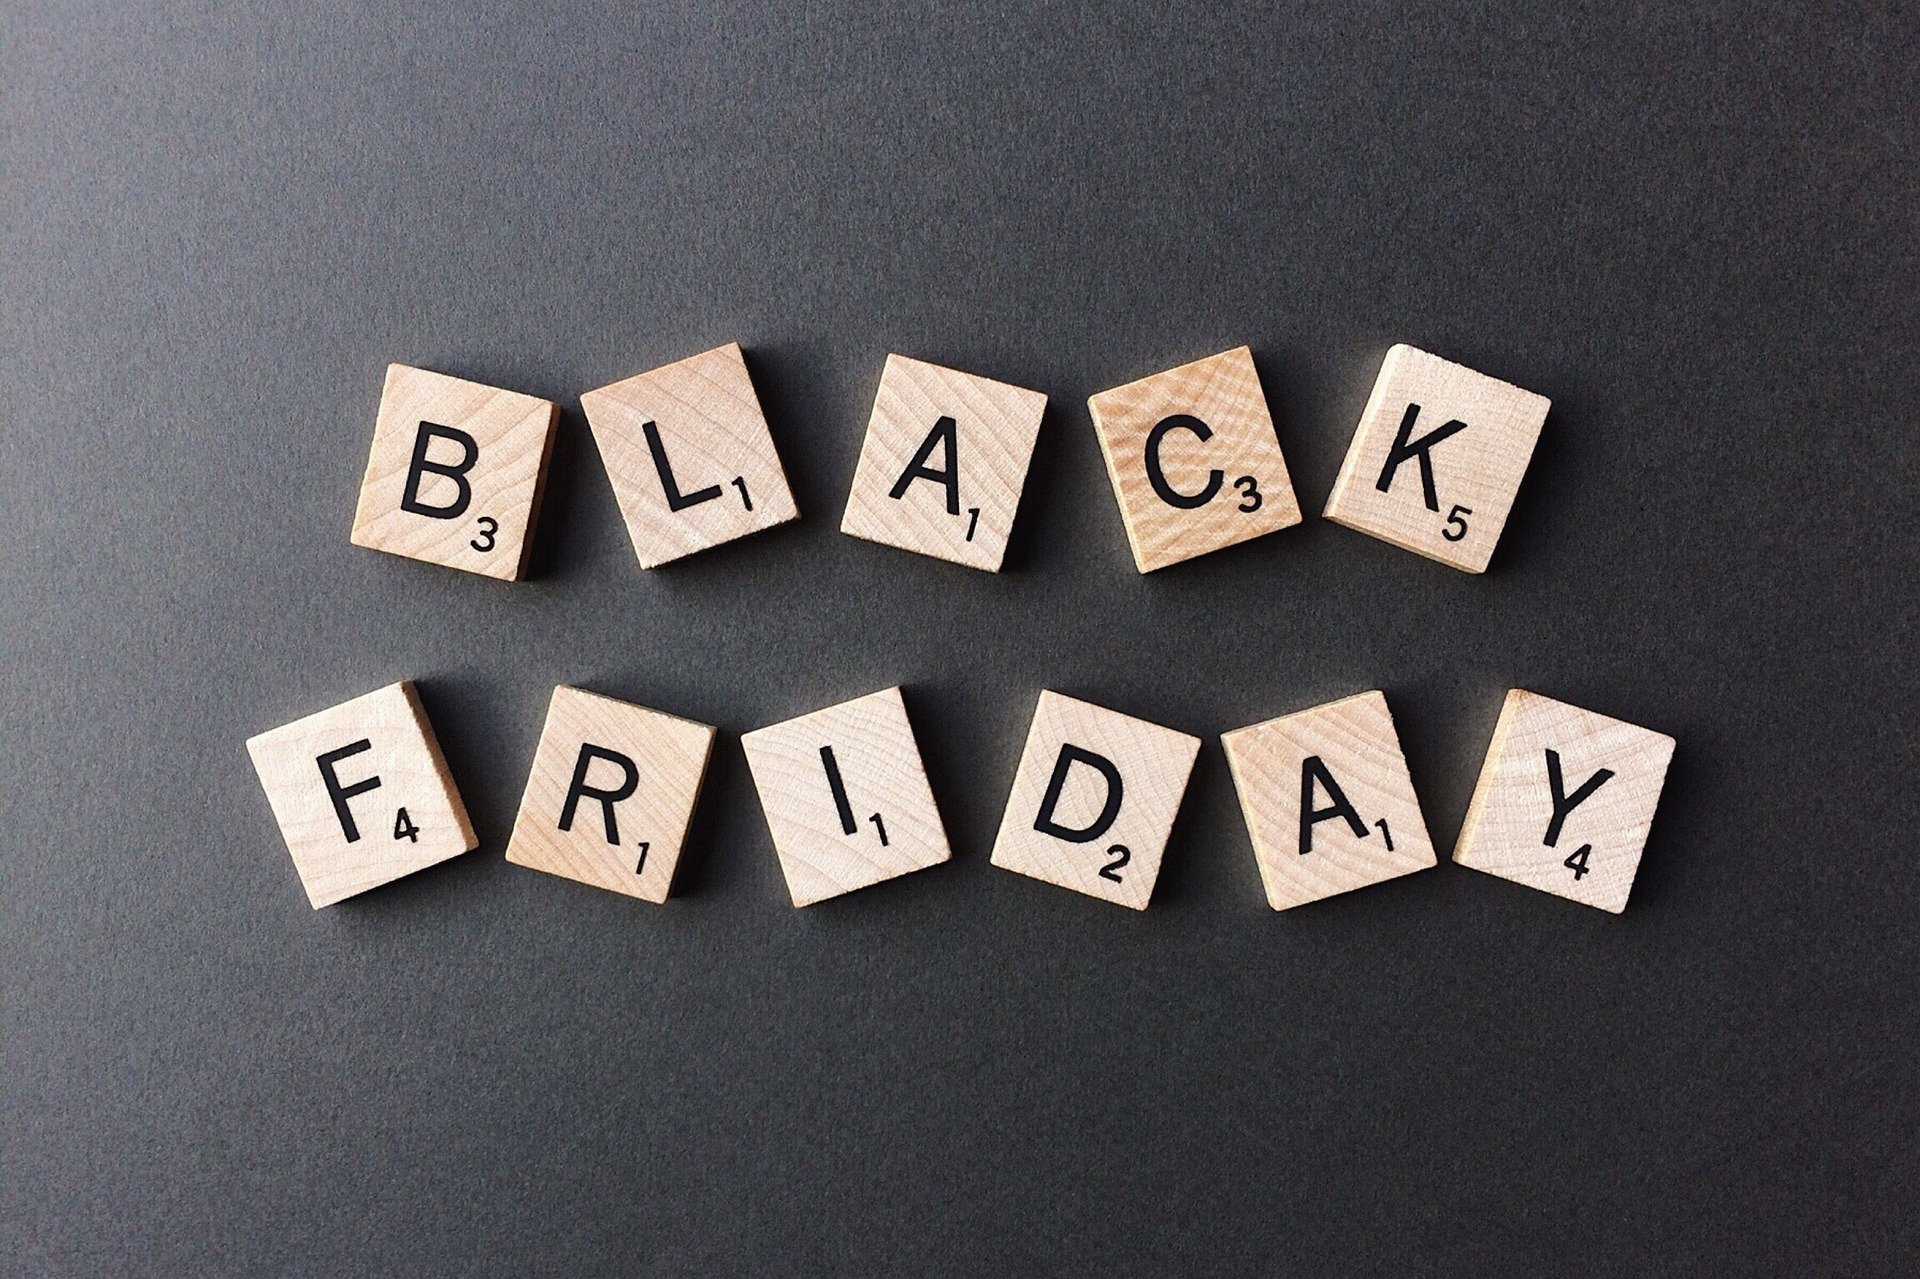 Getting your business ready for Black Friday